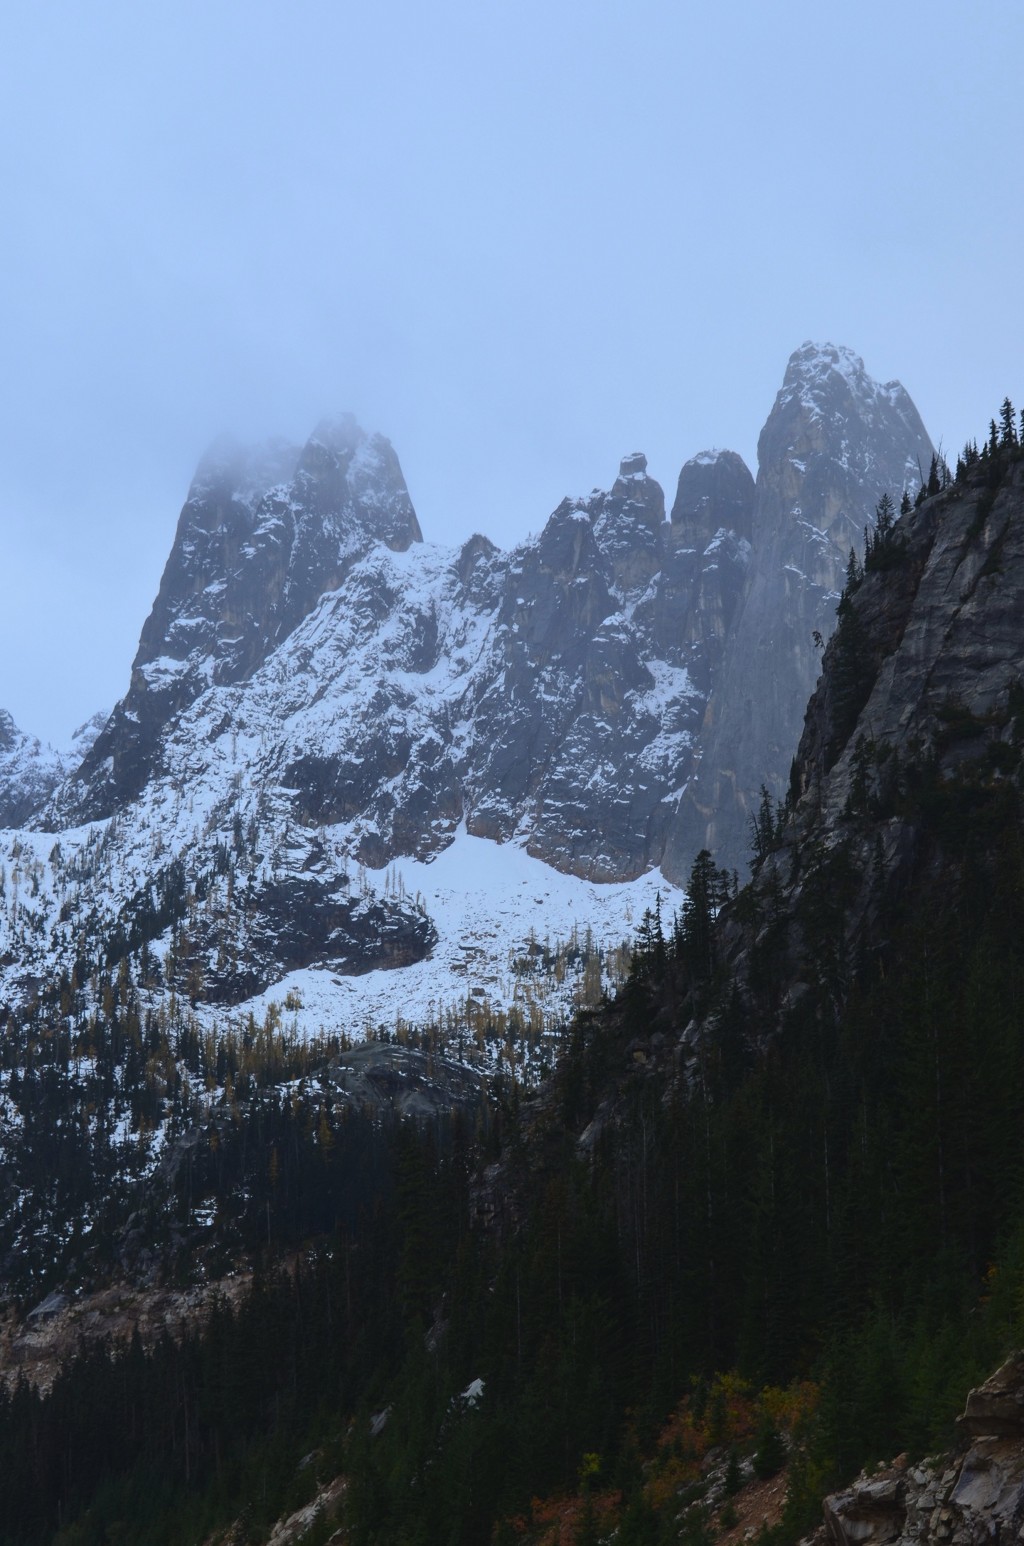 Early snow on Early Winters Spires,near the Pacific Crest Trail